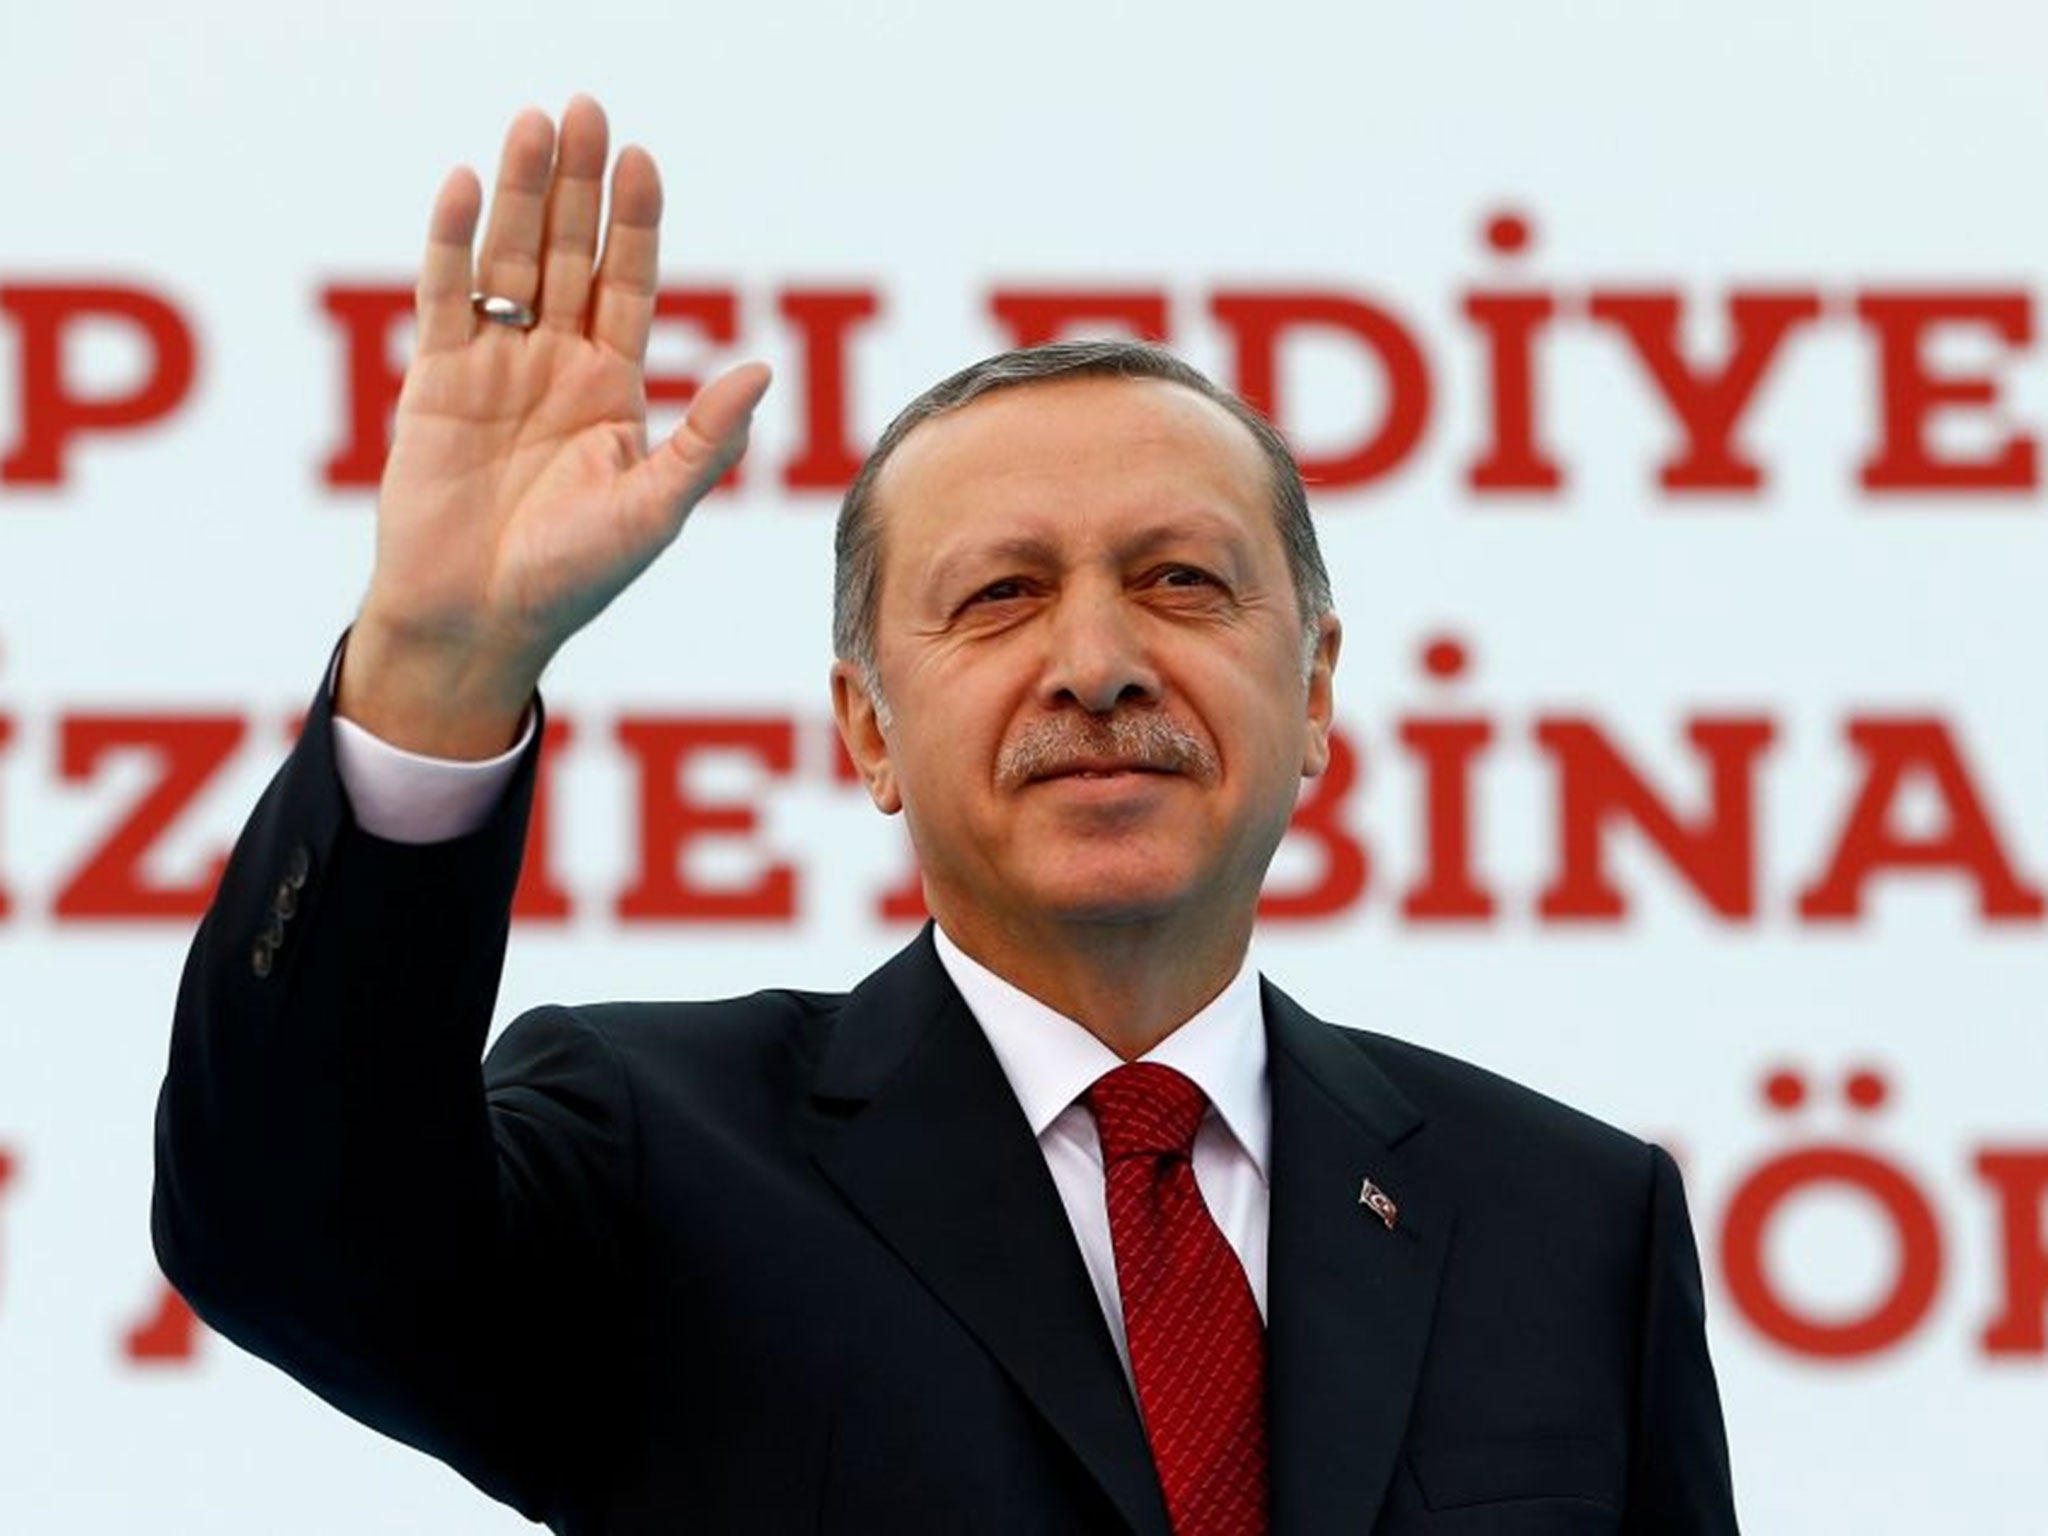 Turkish President Tayyip Erdogan greets his supporters during an opening ceremony in Istanbul, Turkey, 6 May, 2016